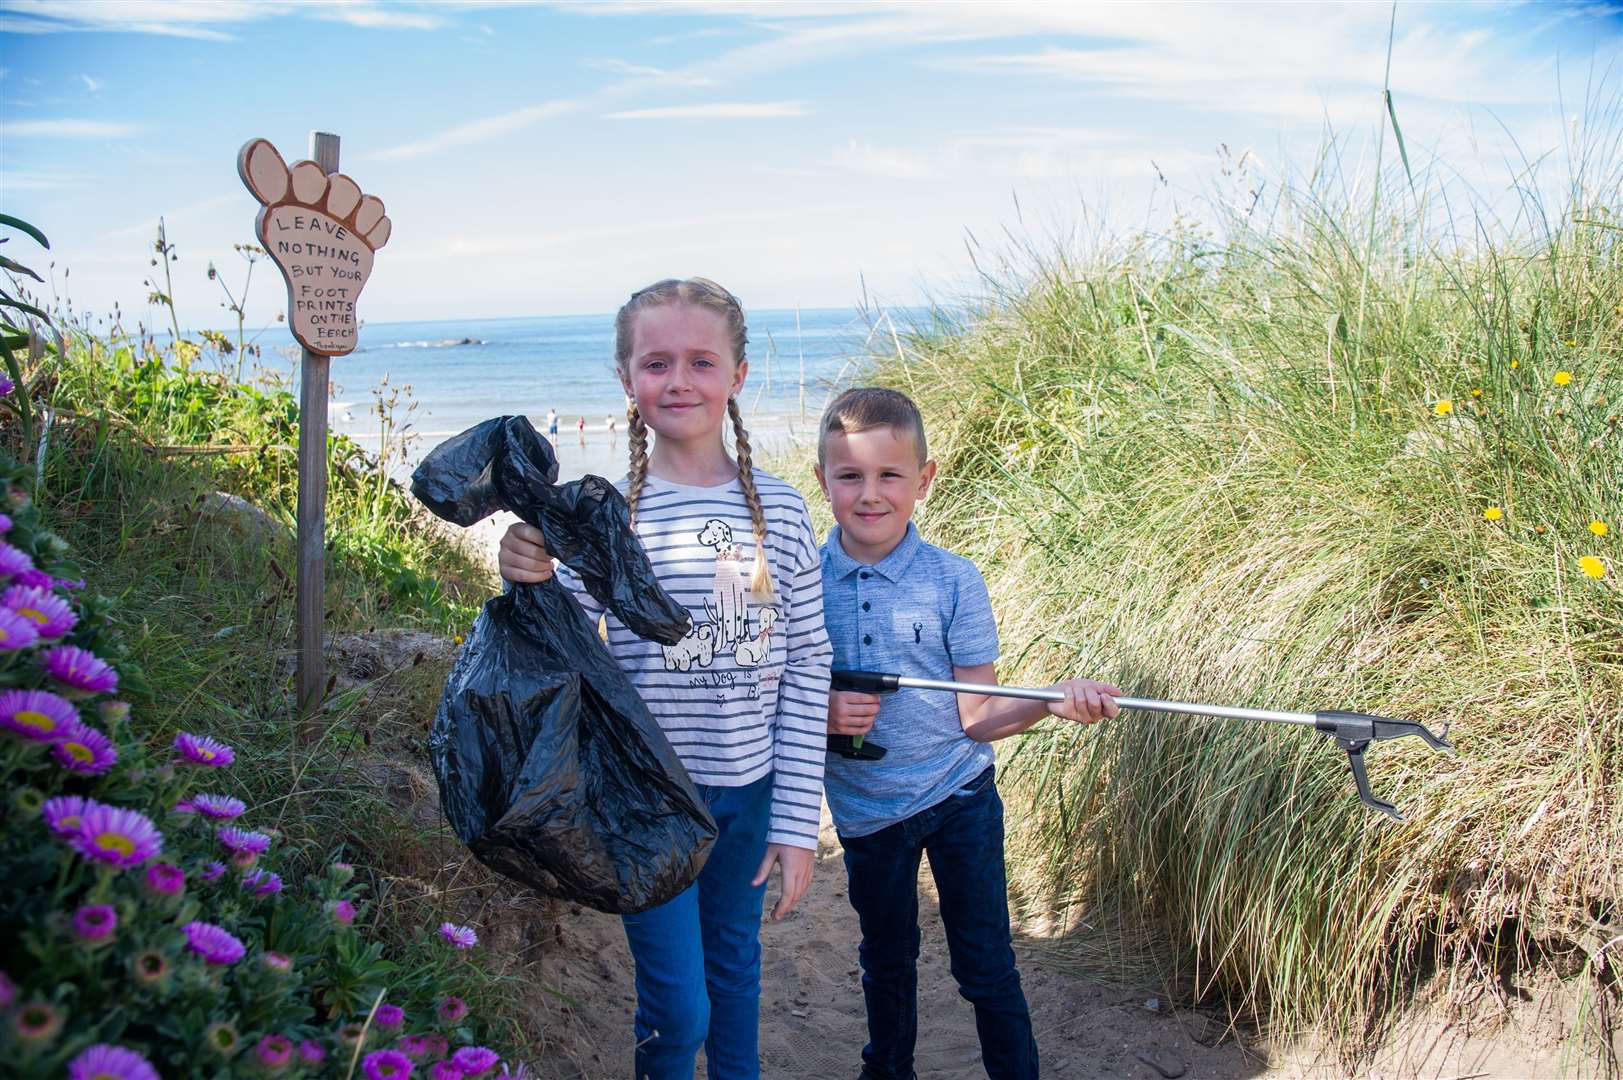 Harry and Polly Williams, from Elgin, are clearing litter from local beaches every week and are raising money for Sea Shepherd UK. Picture: Becky Saunderson.